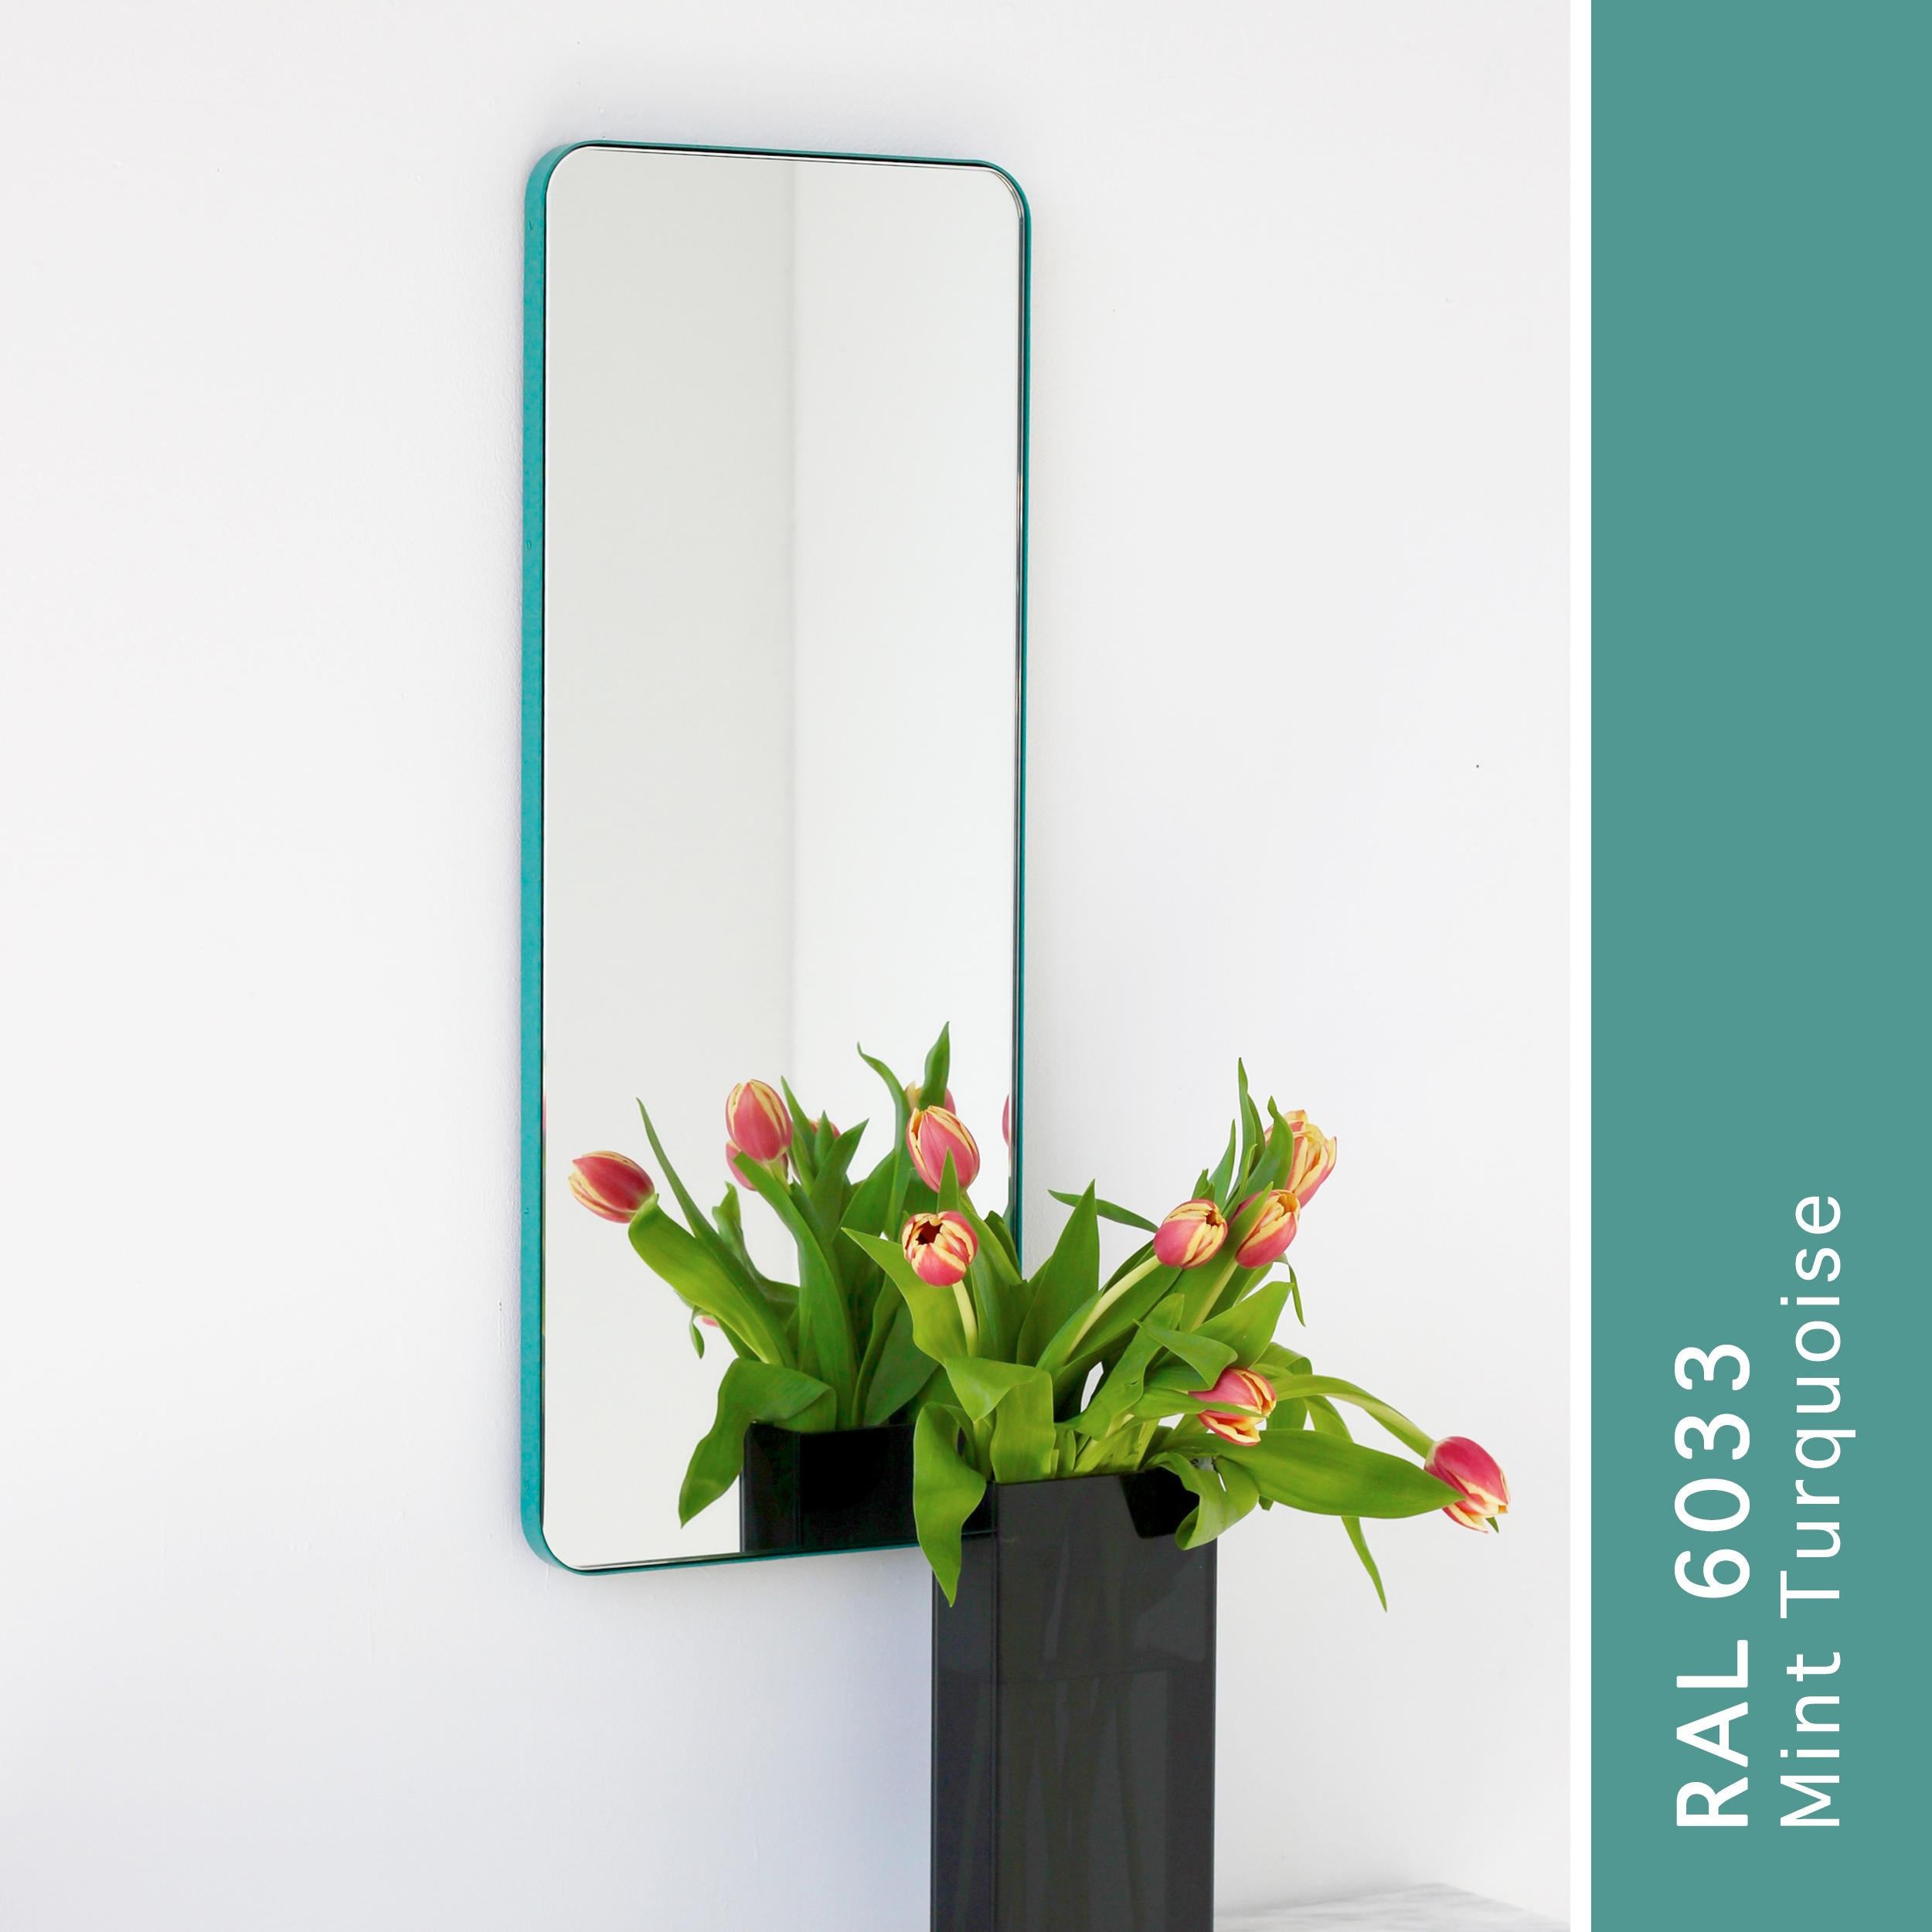 Quadris Rectangular Modern Mirror with Mint Turquoise Frame, XL For Sale 1